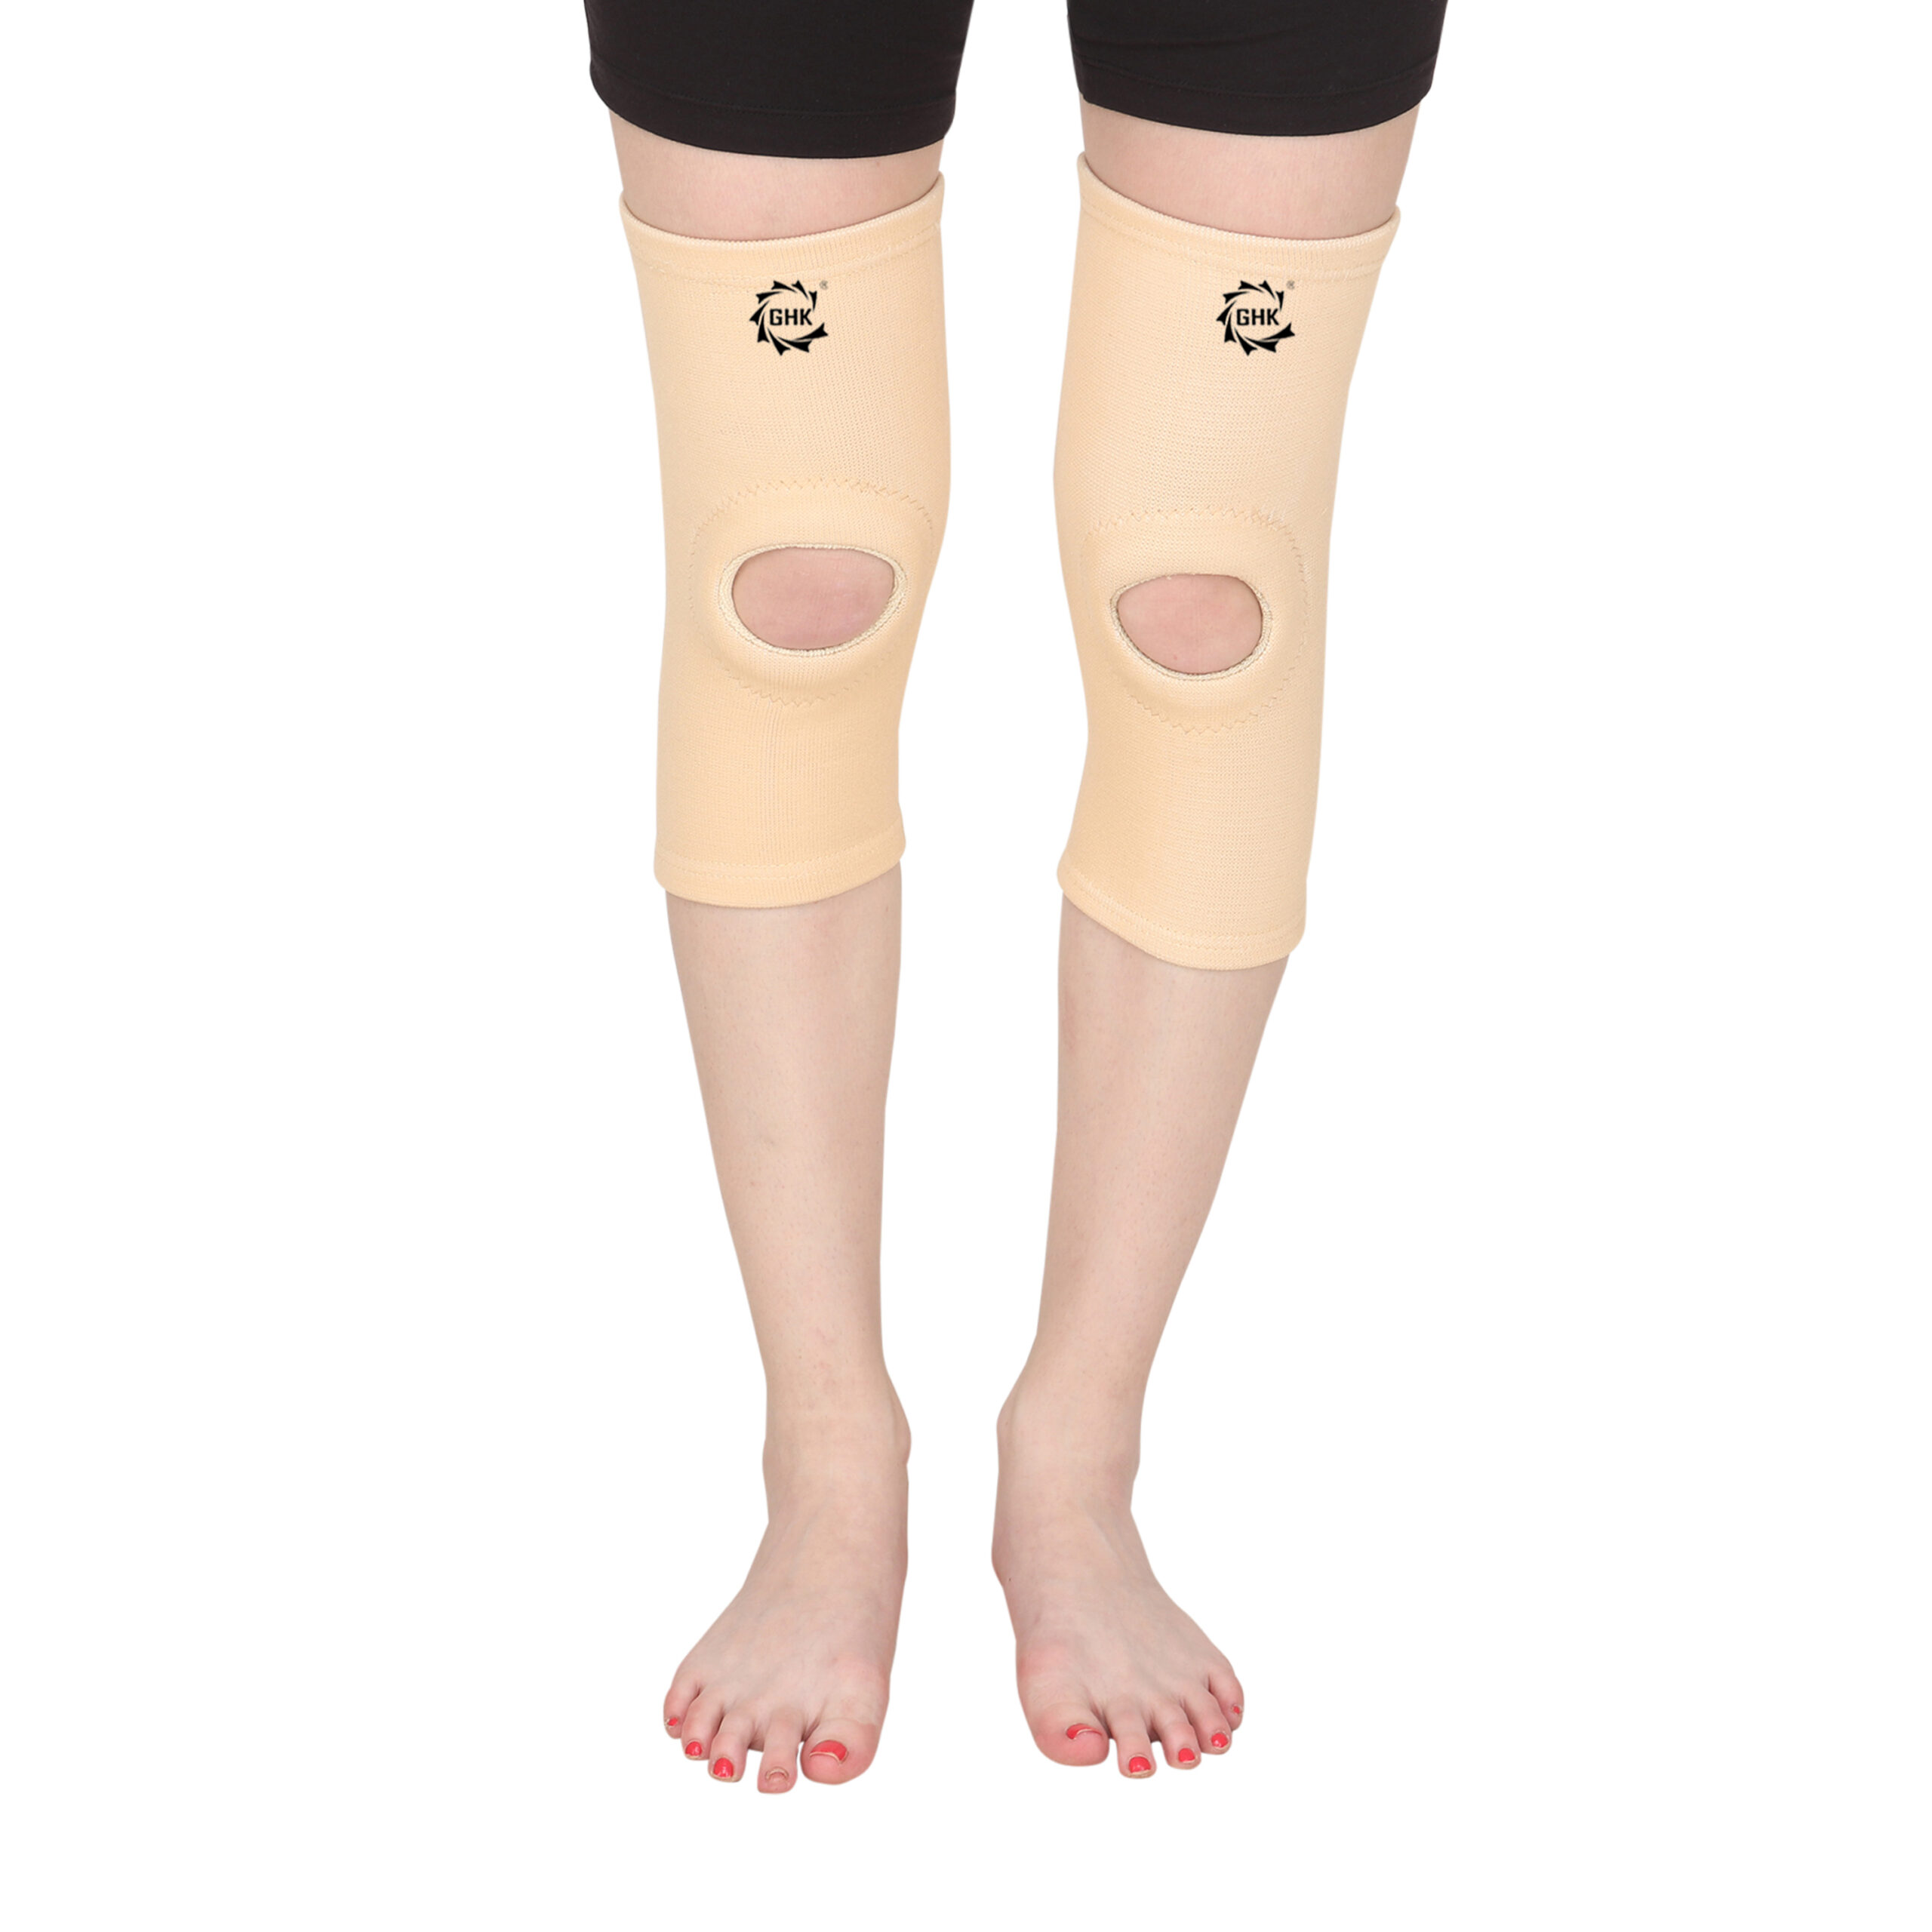 GHK S8 Knee Cap Open Patella for Complete Support in Movement Unisex